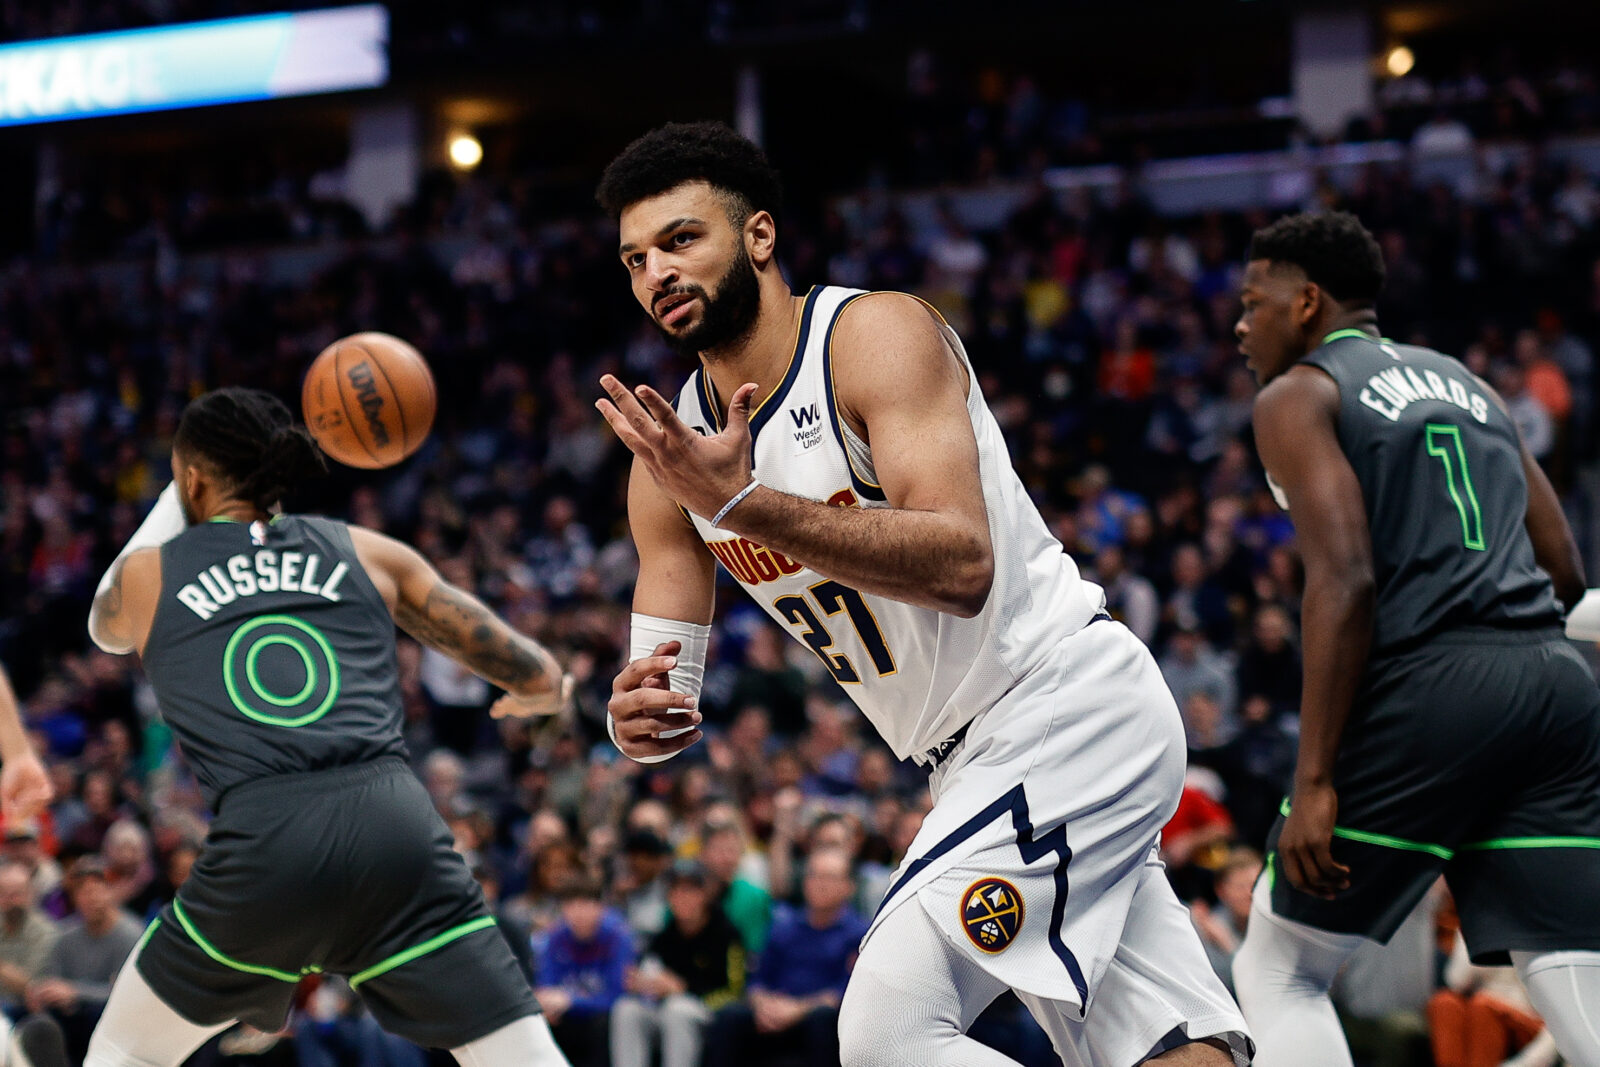 "Live Coverage Timberwolves vs Nuggets in Western Conference Playoffs